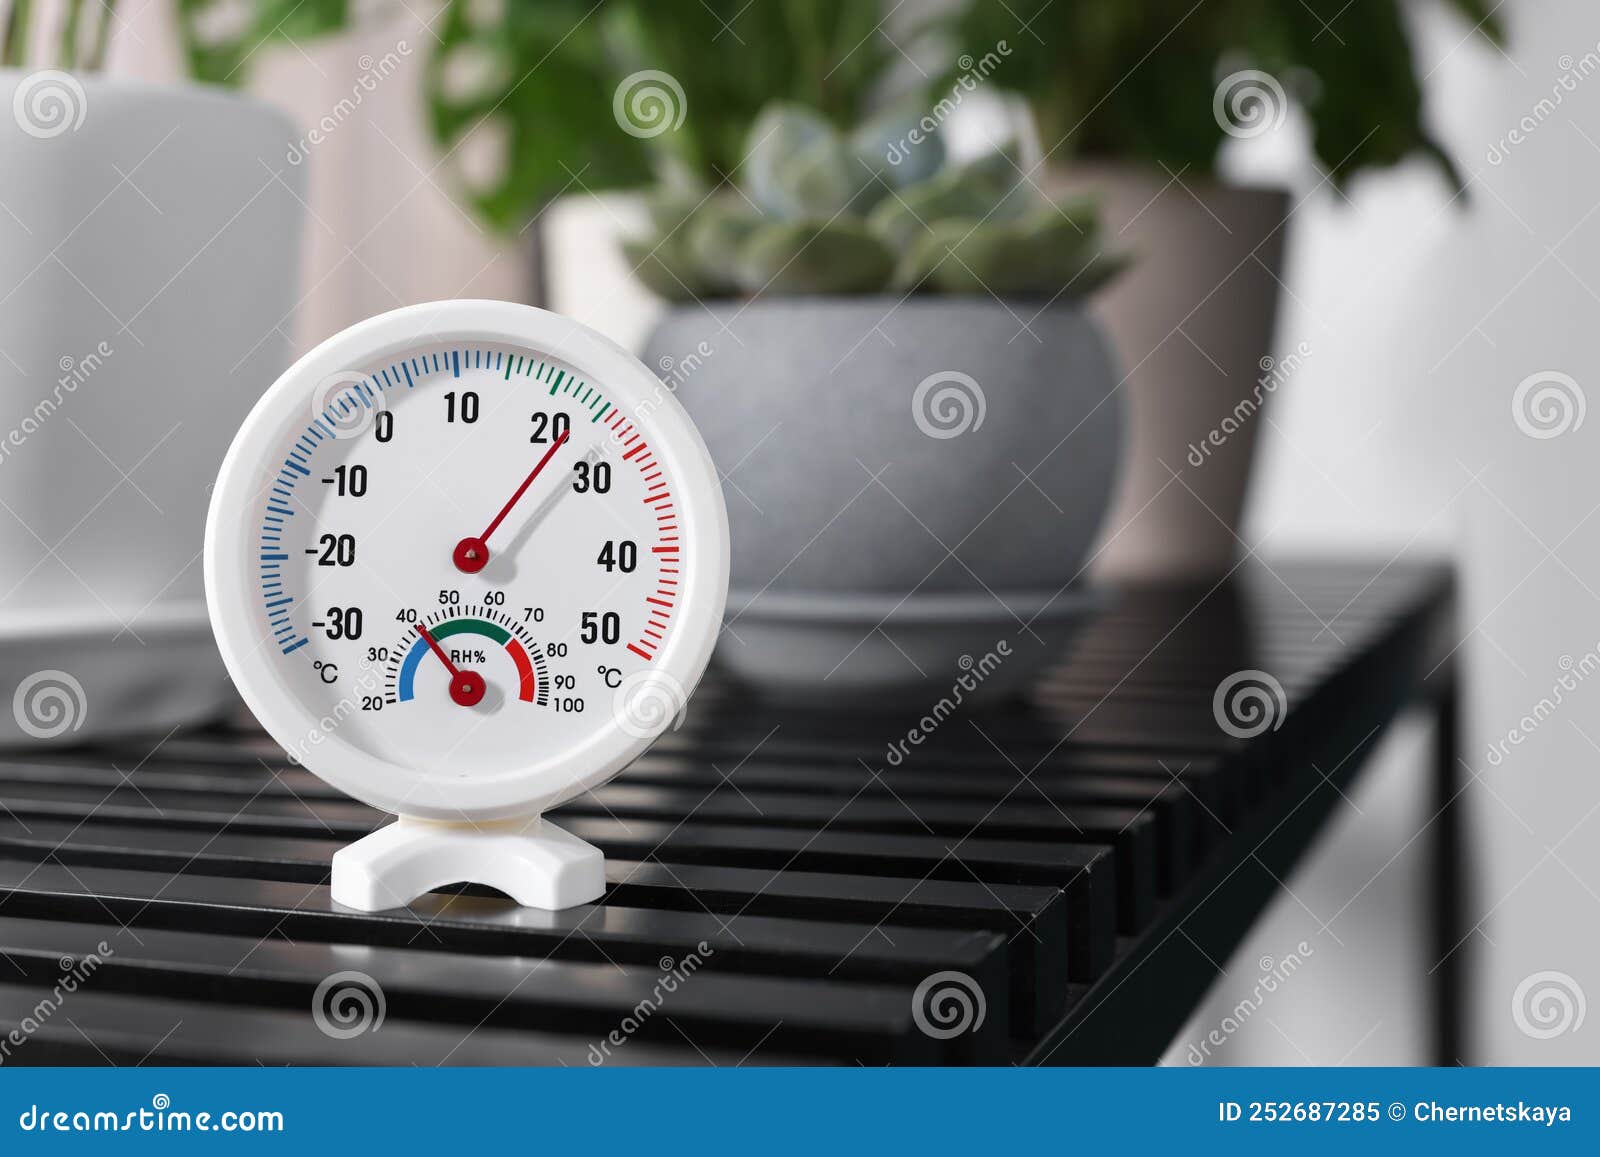 https://thumbs.dreamstime.com/z/round-mechanical-hygrometer-black-table-indoors-space-text-252687285.jpg